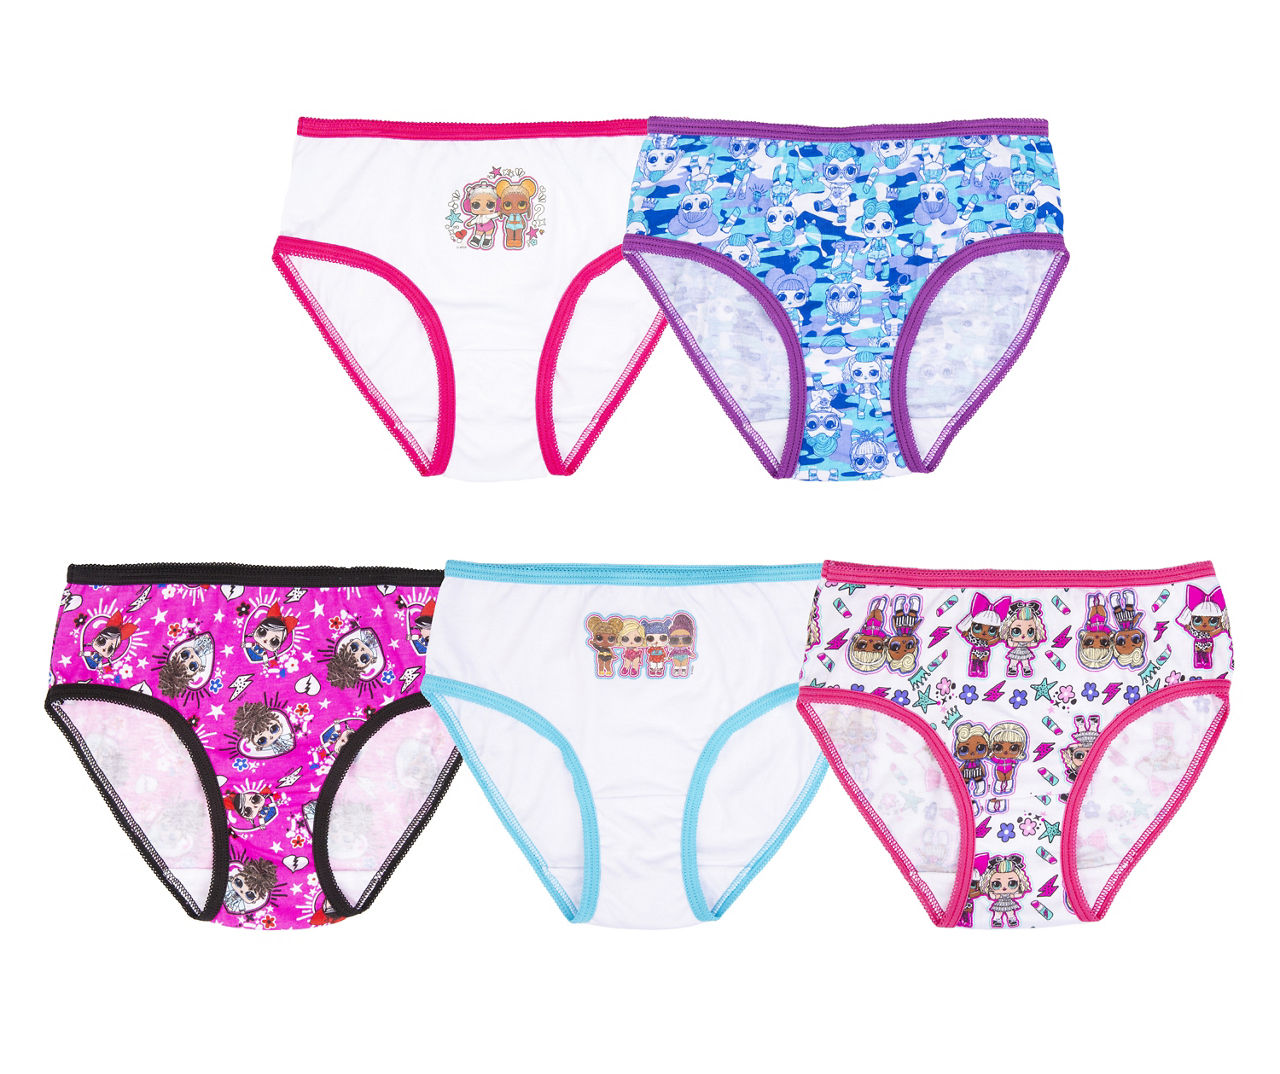 Kids' Size 4 White, Blue & Pink Briefs With Coloring Page, 5-Pack